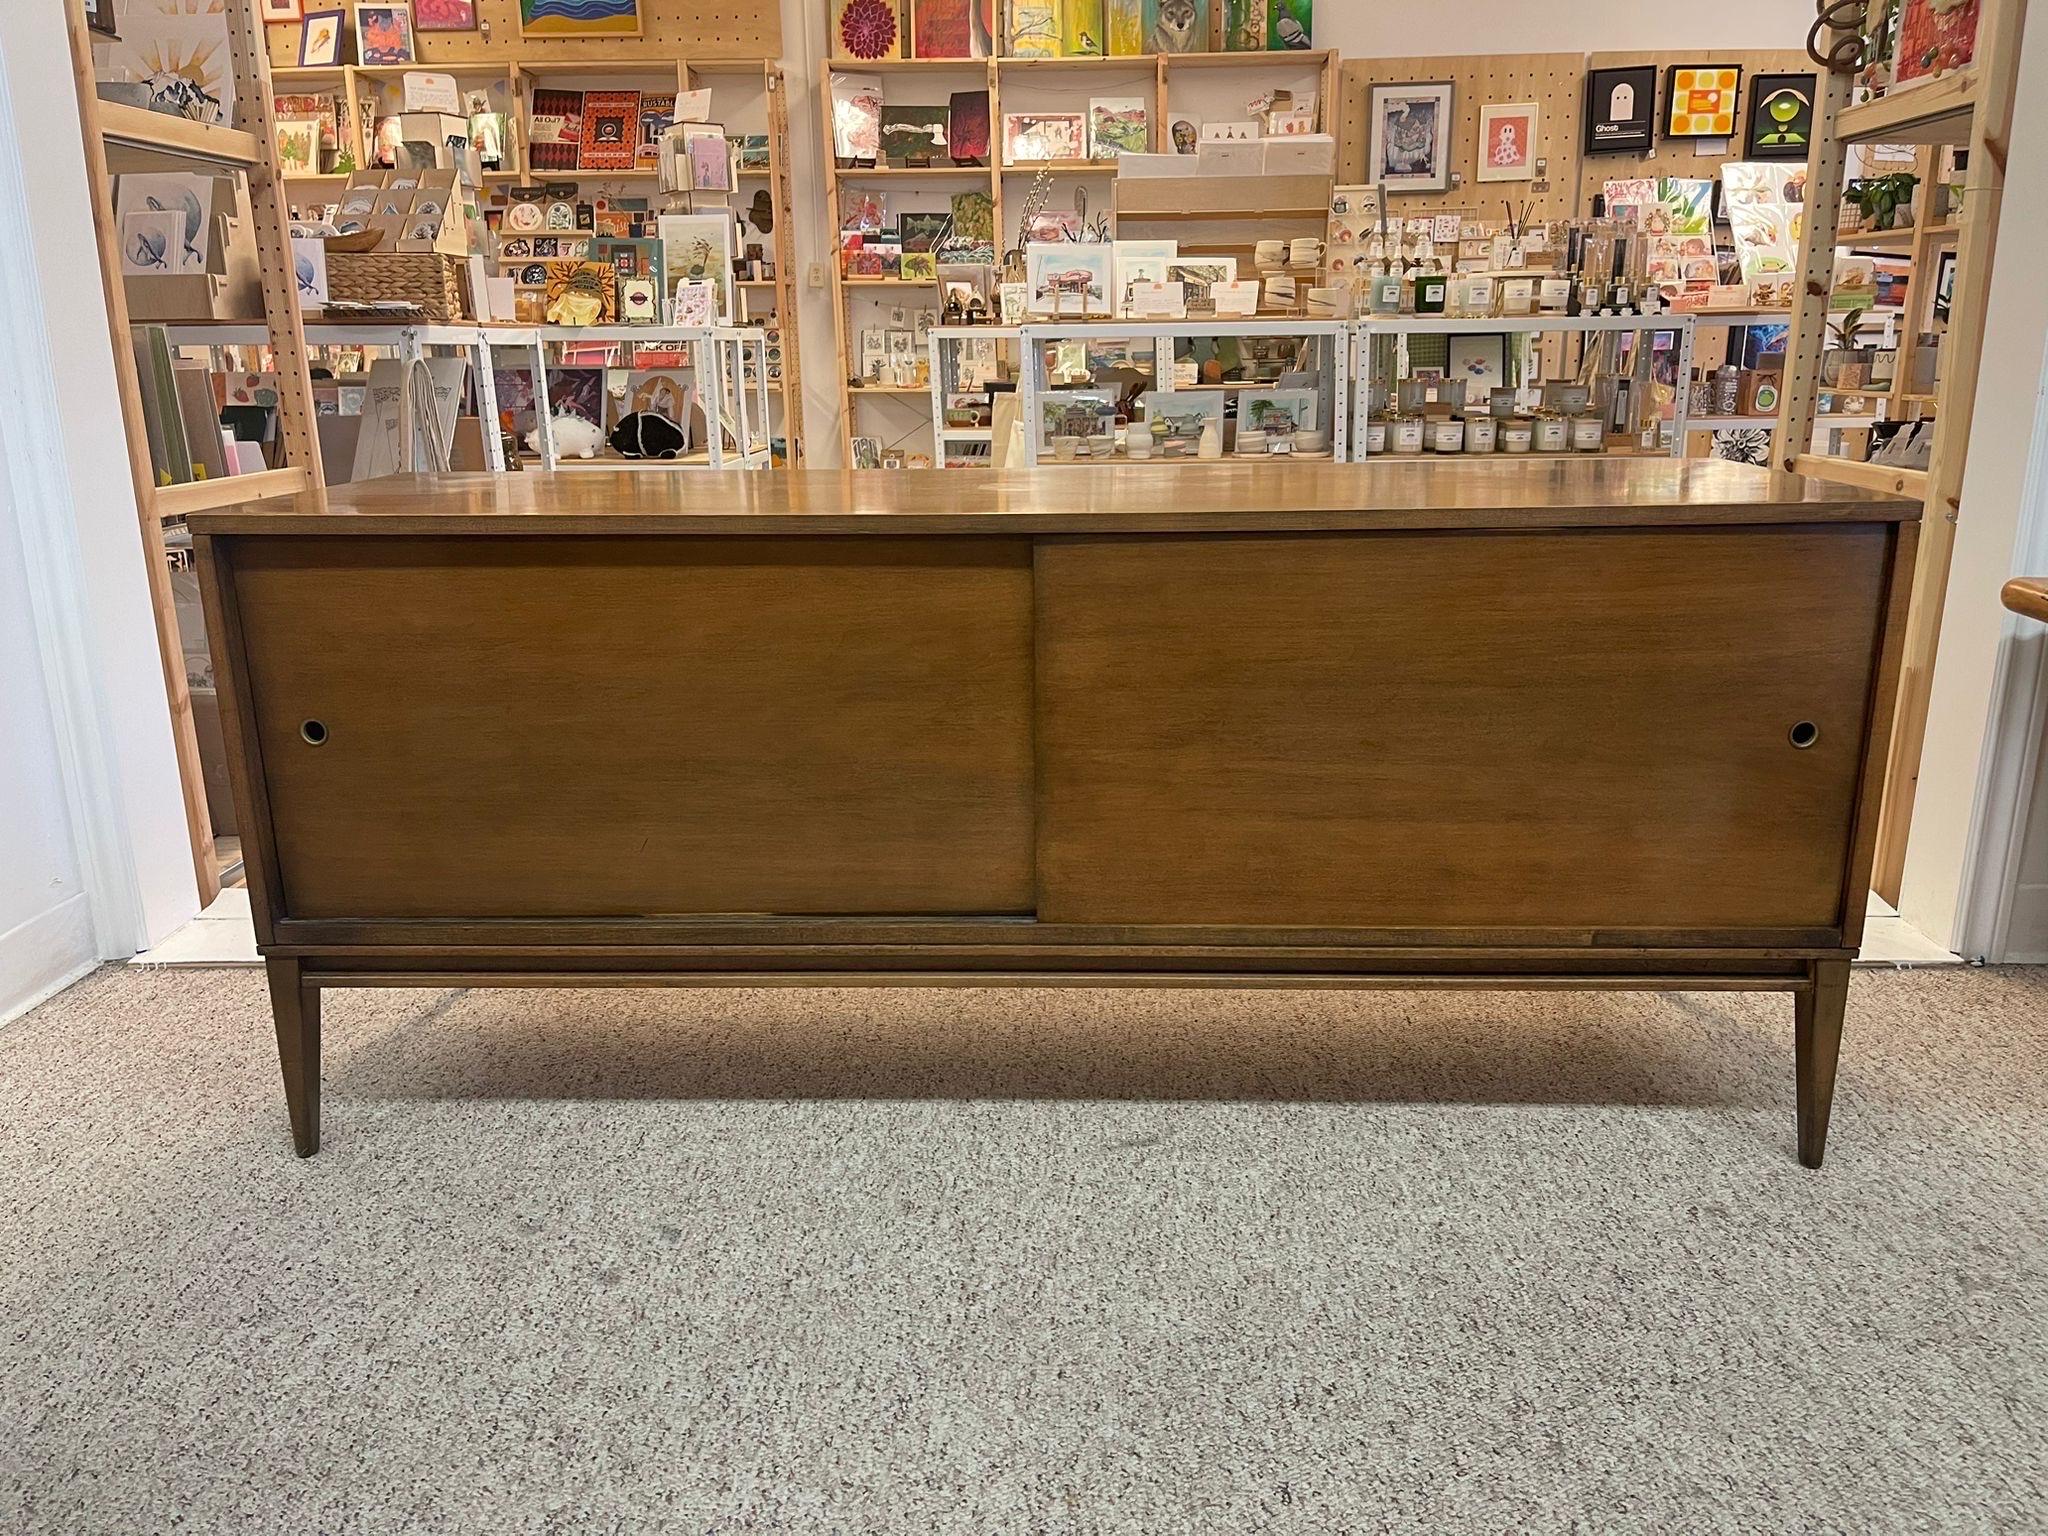 Each side of the cabinet has adjustable shelving. Tapered Legs. Unique handles to the sliding doors, a circular hole with metal ( brass toned ) lining. Circa 1950s. By Paul McCobb for Winchendon Furniture. Vintage Condition Consistent with Age as